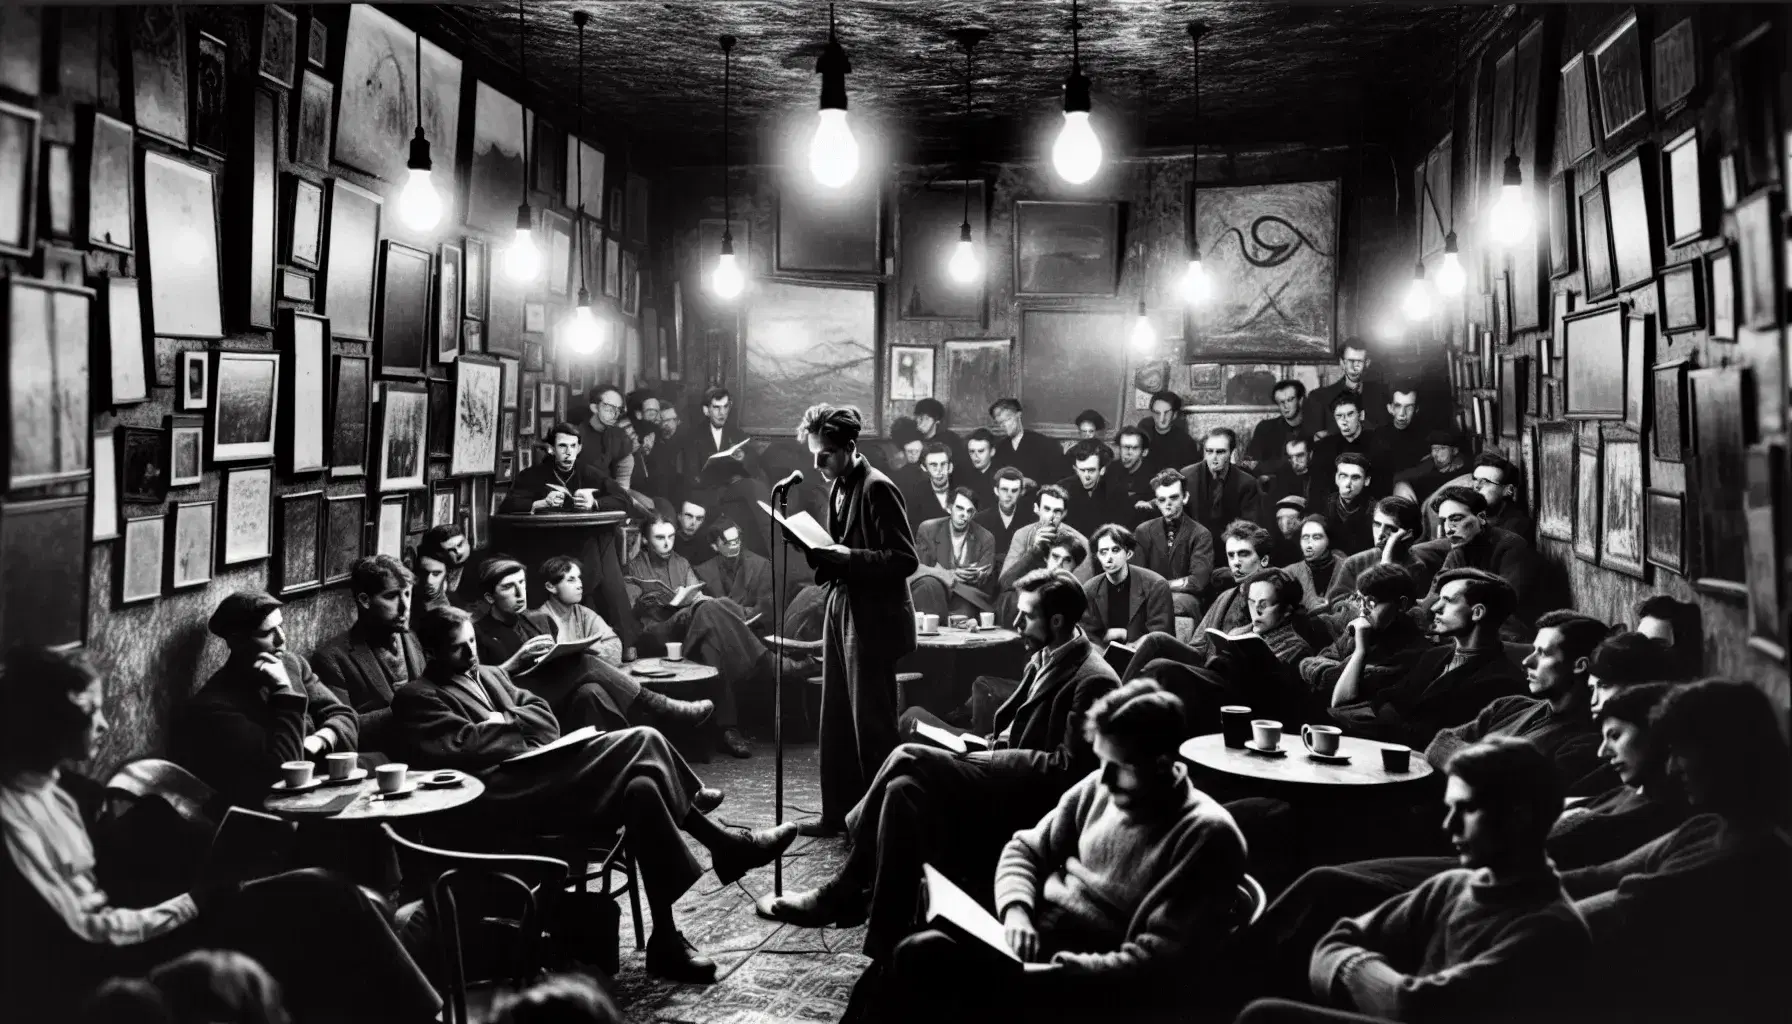 Vintage black and white photo of a poetry reading in a bohemian coffeehouse, with an engaged audience listening to a speaker at a microphone.